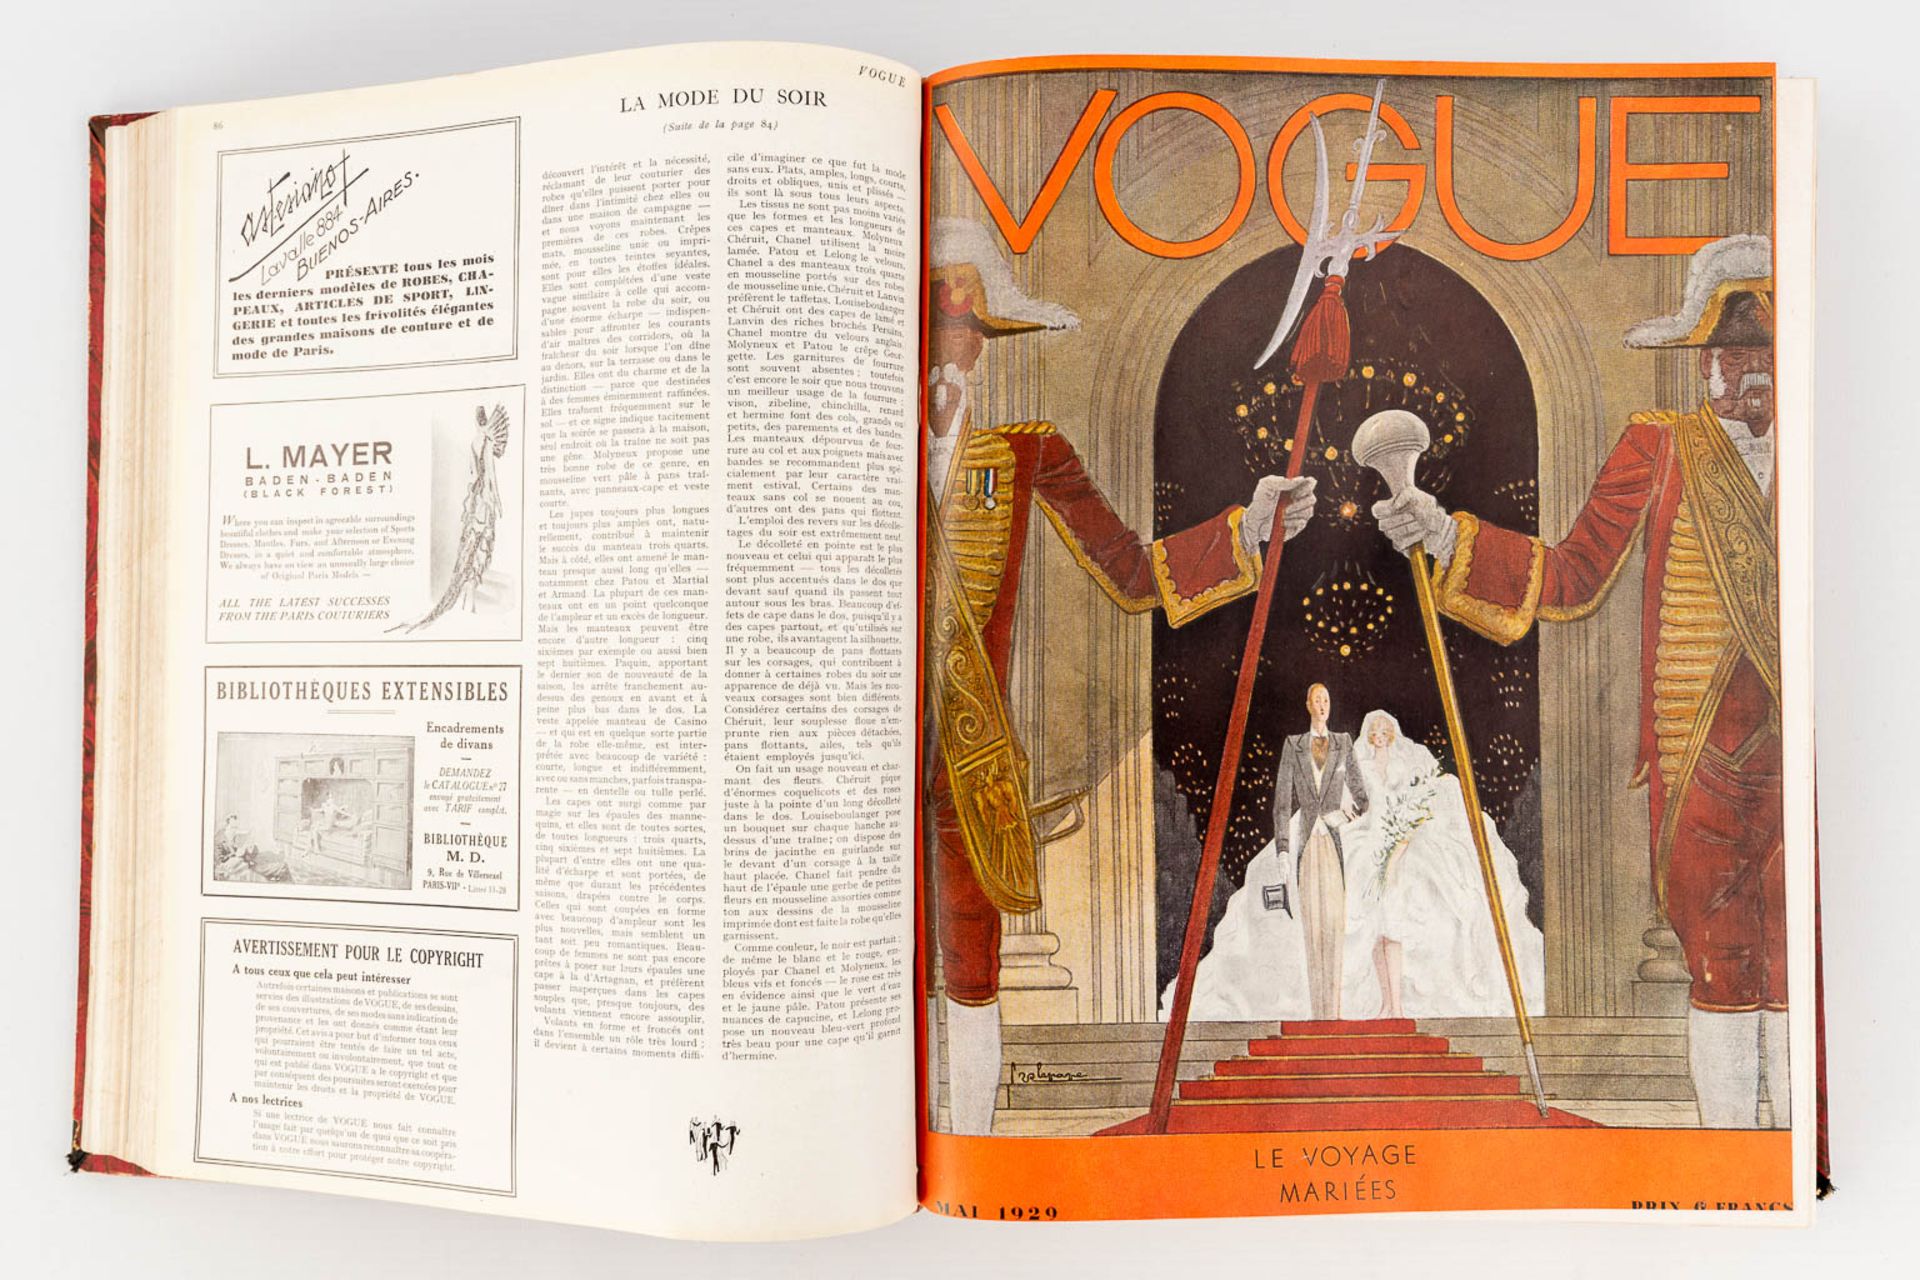 An assembled book with the Vogue magazine, 1929. (L: 5 x W: 25,5 x H: 31,5 cm) - Image 7 of 18